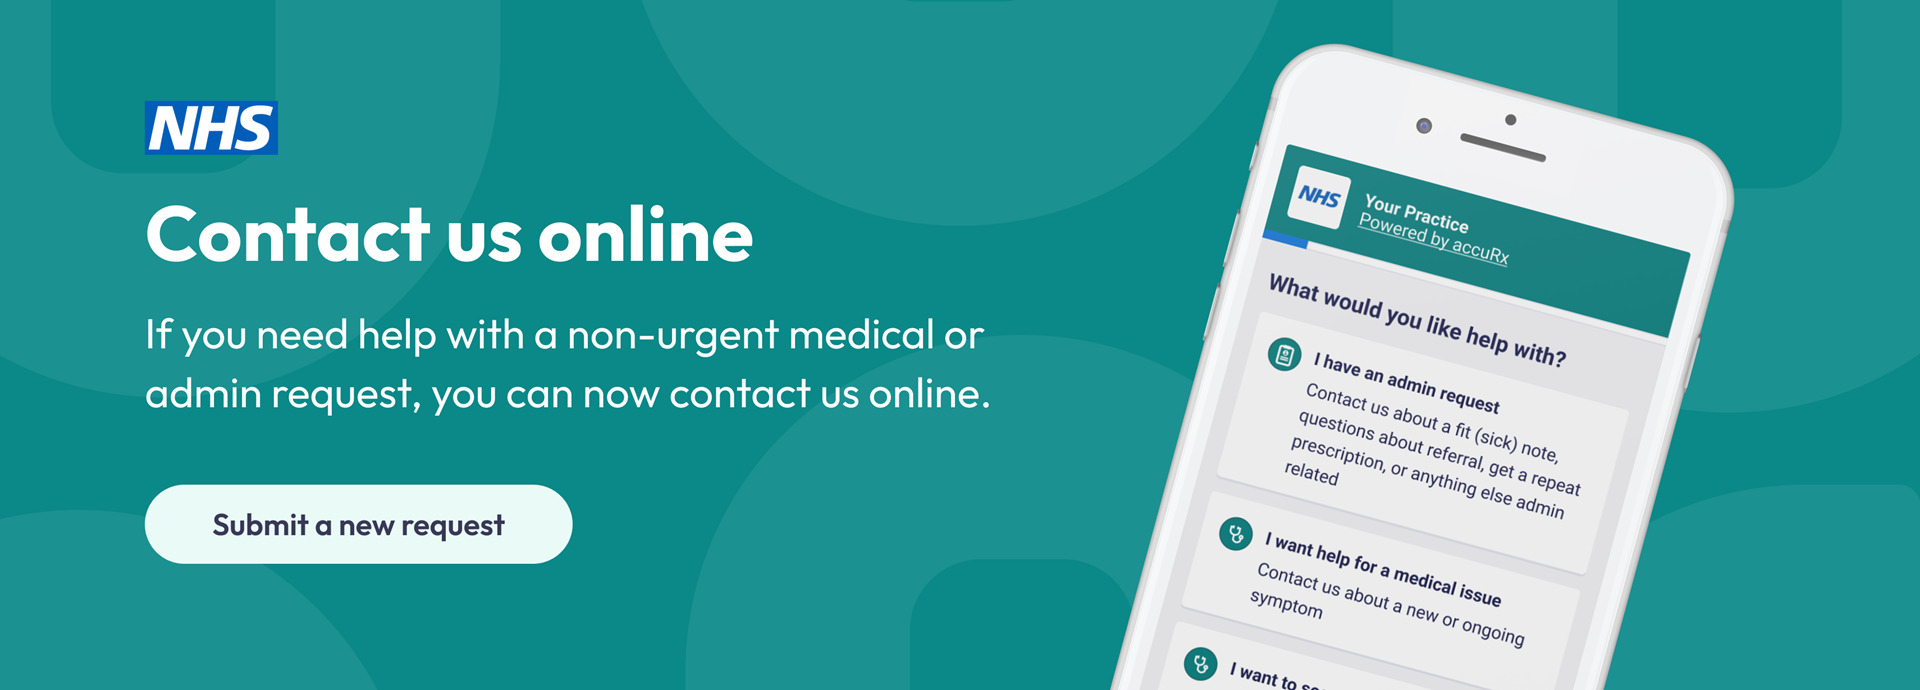 Contact Us Online - If you need help with a non-urgent medical or admin request, you can now contact us online